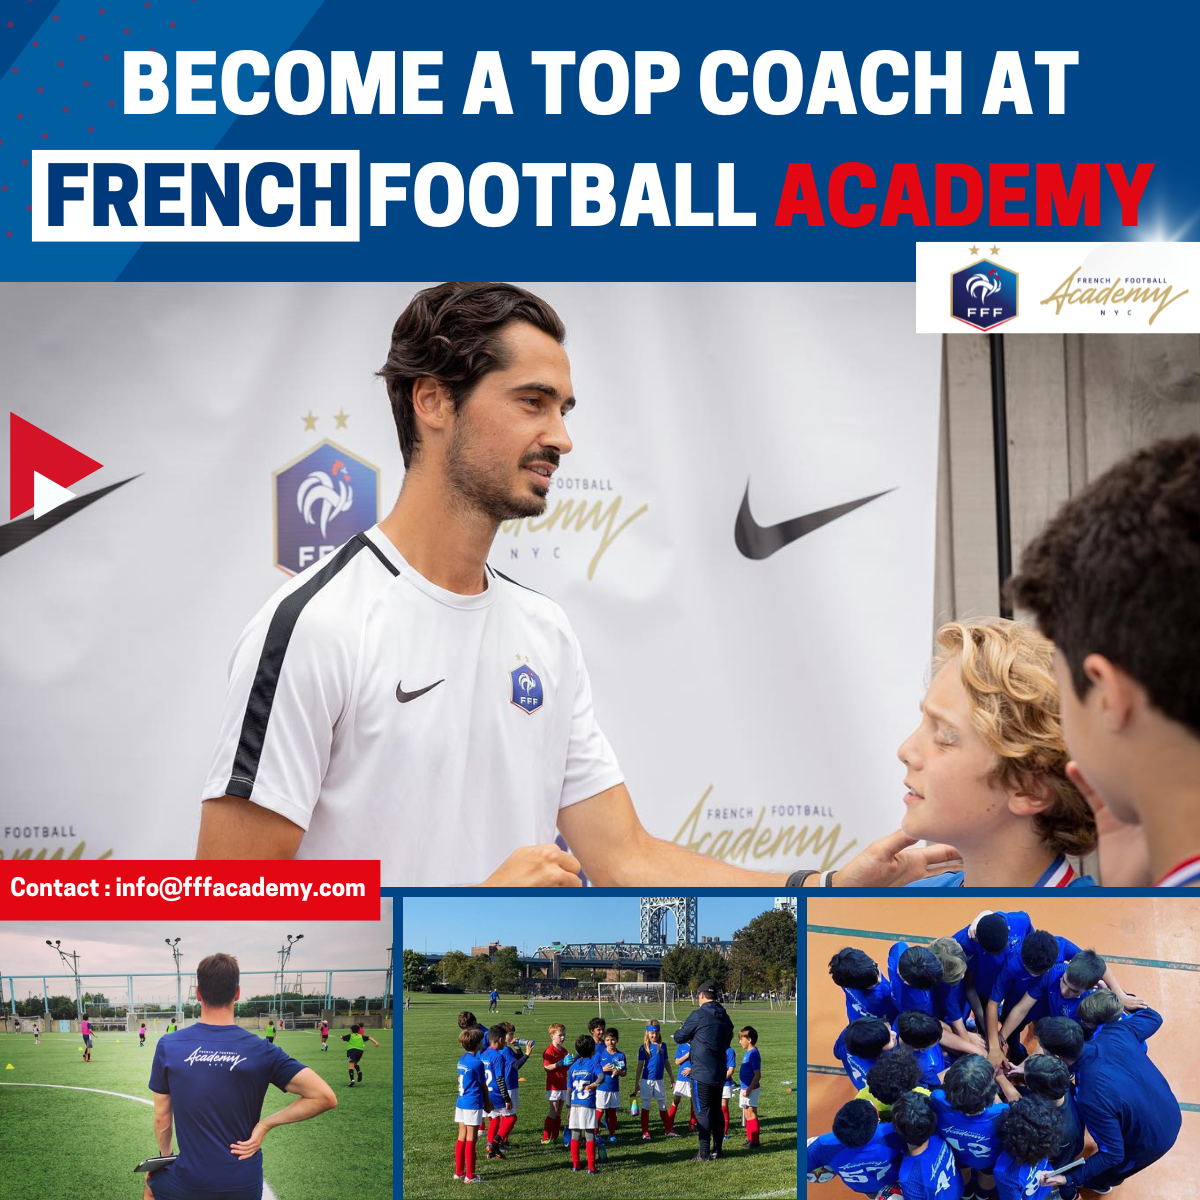 BECOME A TOP COACH AT FRENCH FOOTBALL ACADEMY